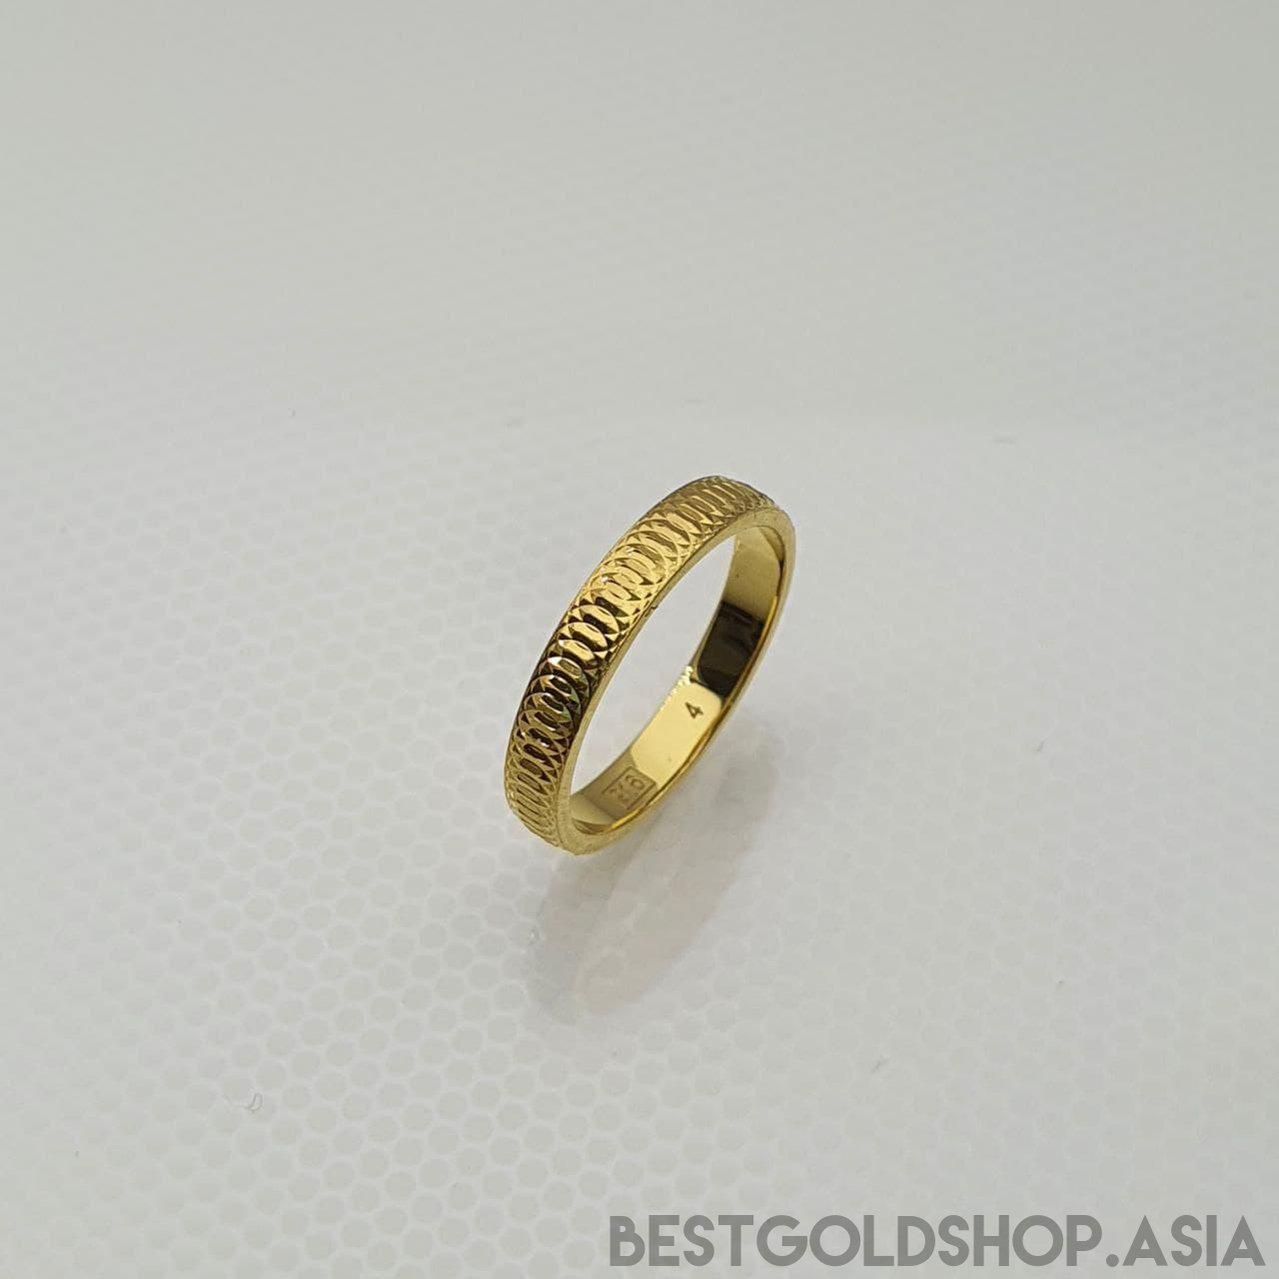 22K / 916 Gold Cutting Pinky Smooth finish V2-916 gold-Best Gold Shop